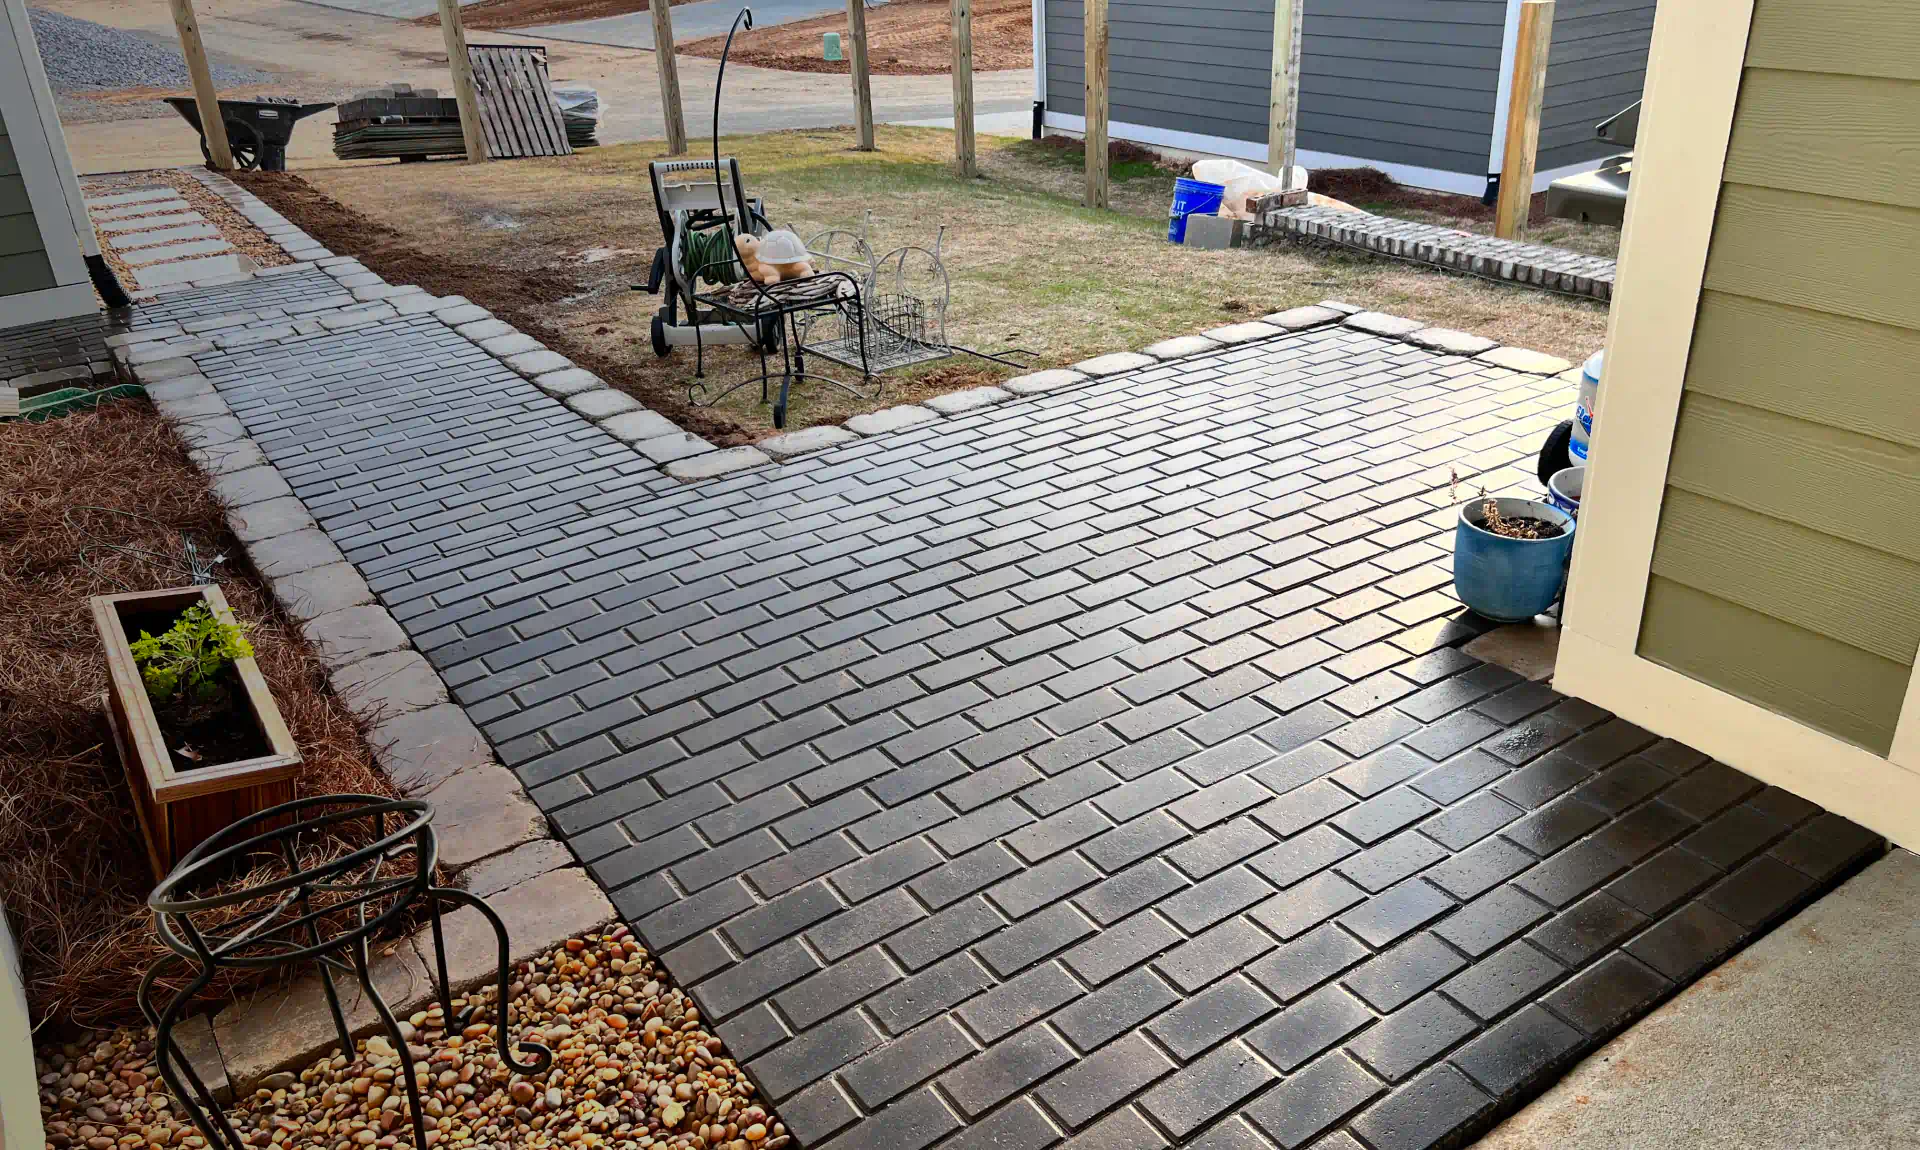 exterior view of a house a paver installation